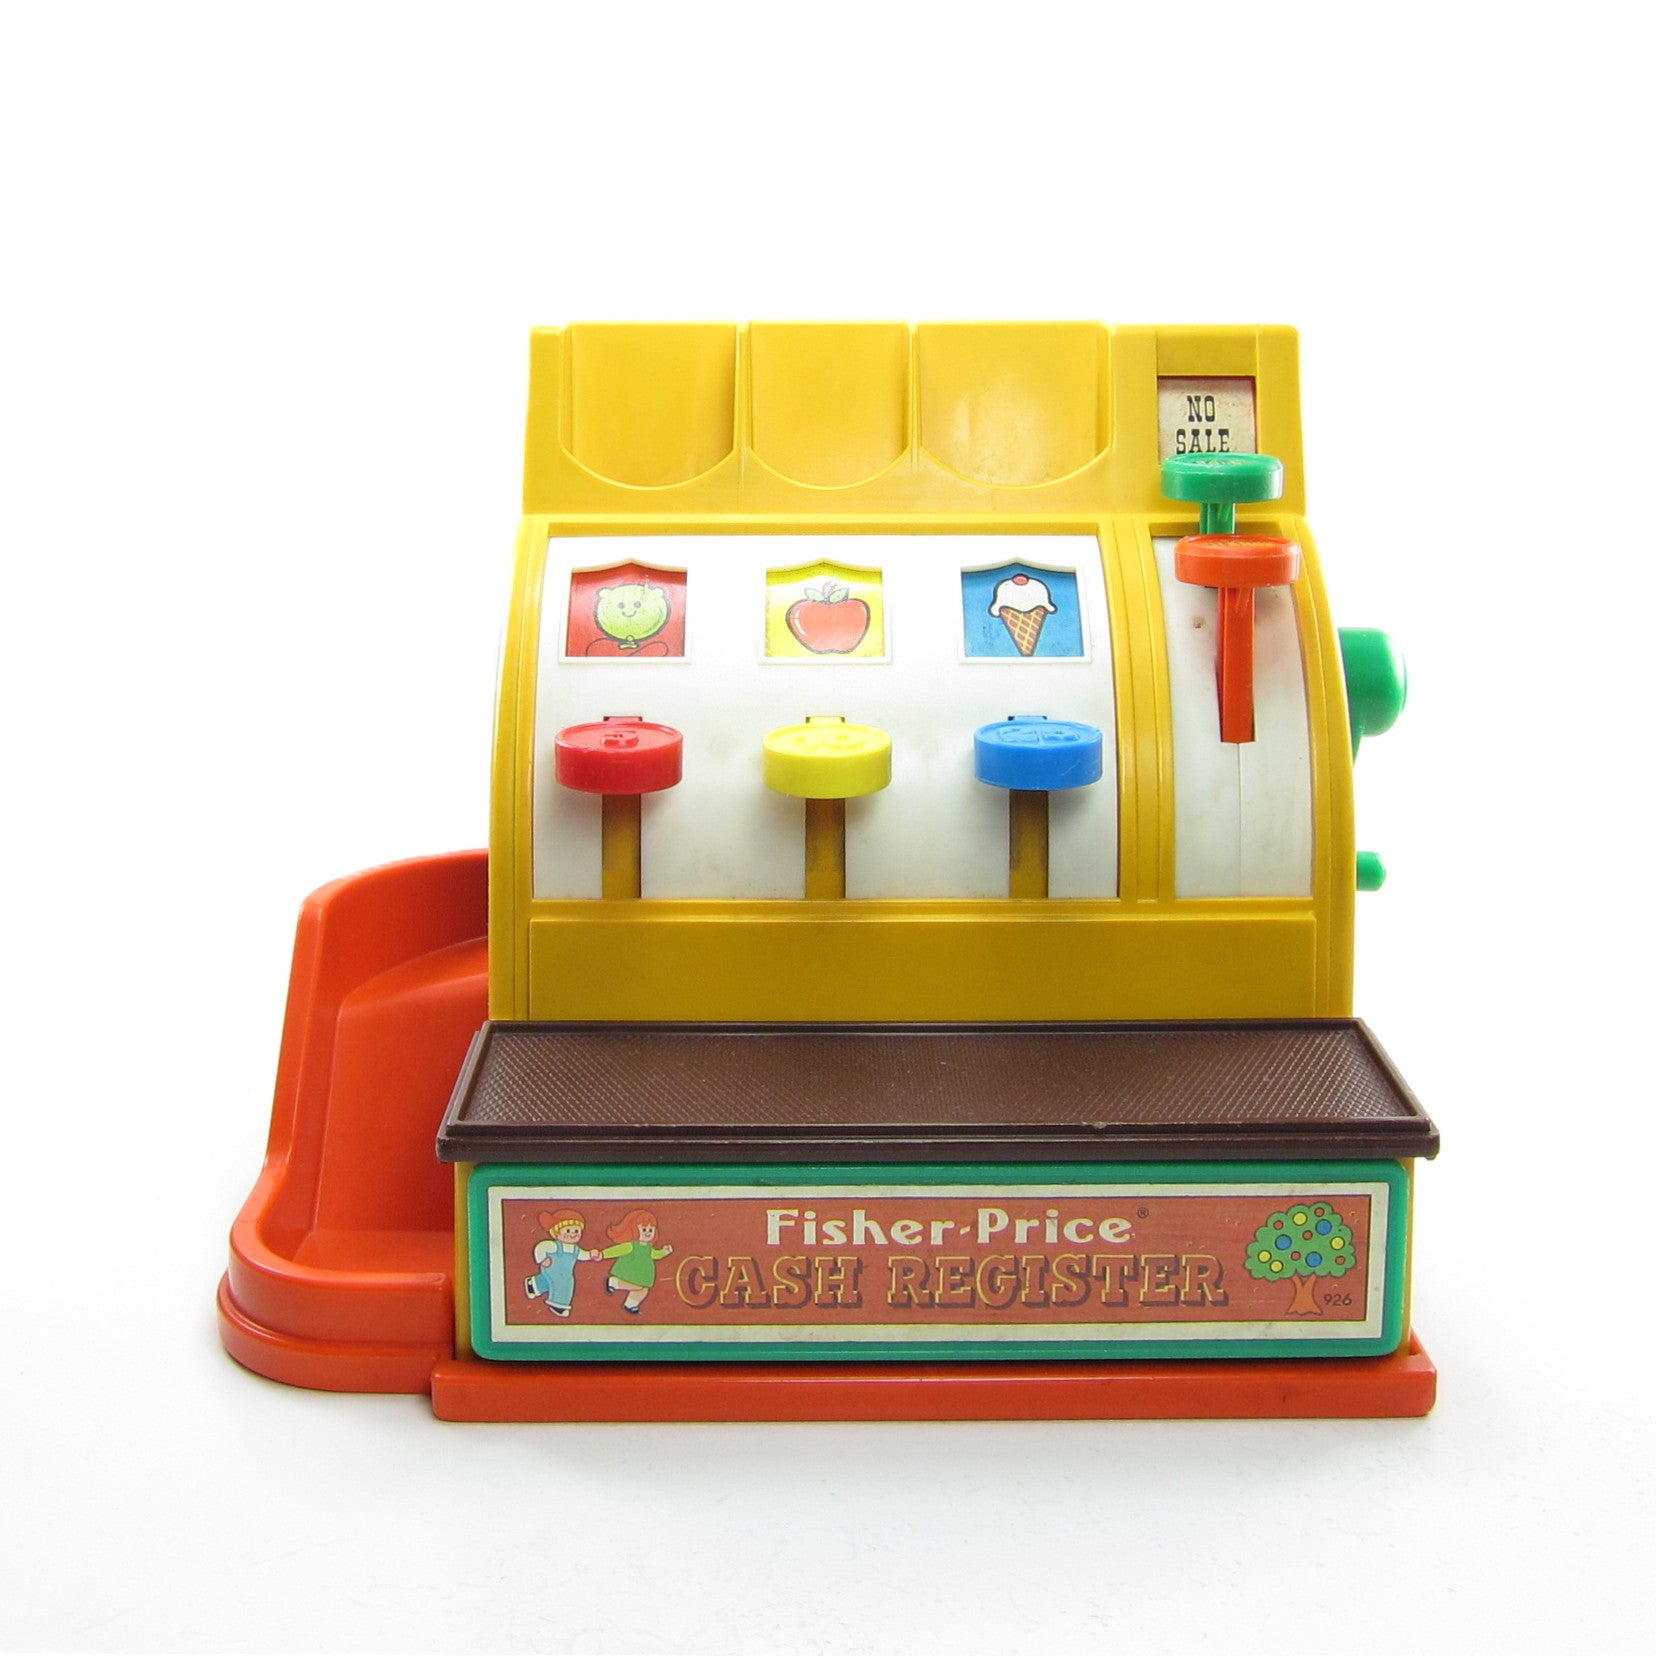 Fisher-Price cash register toy 1974